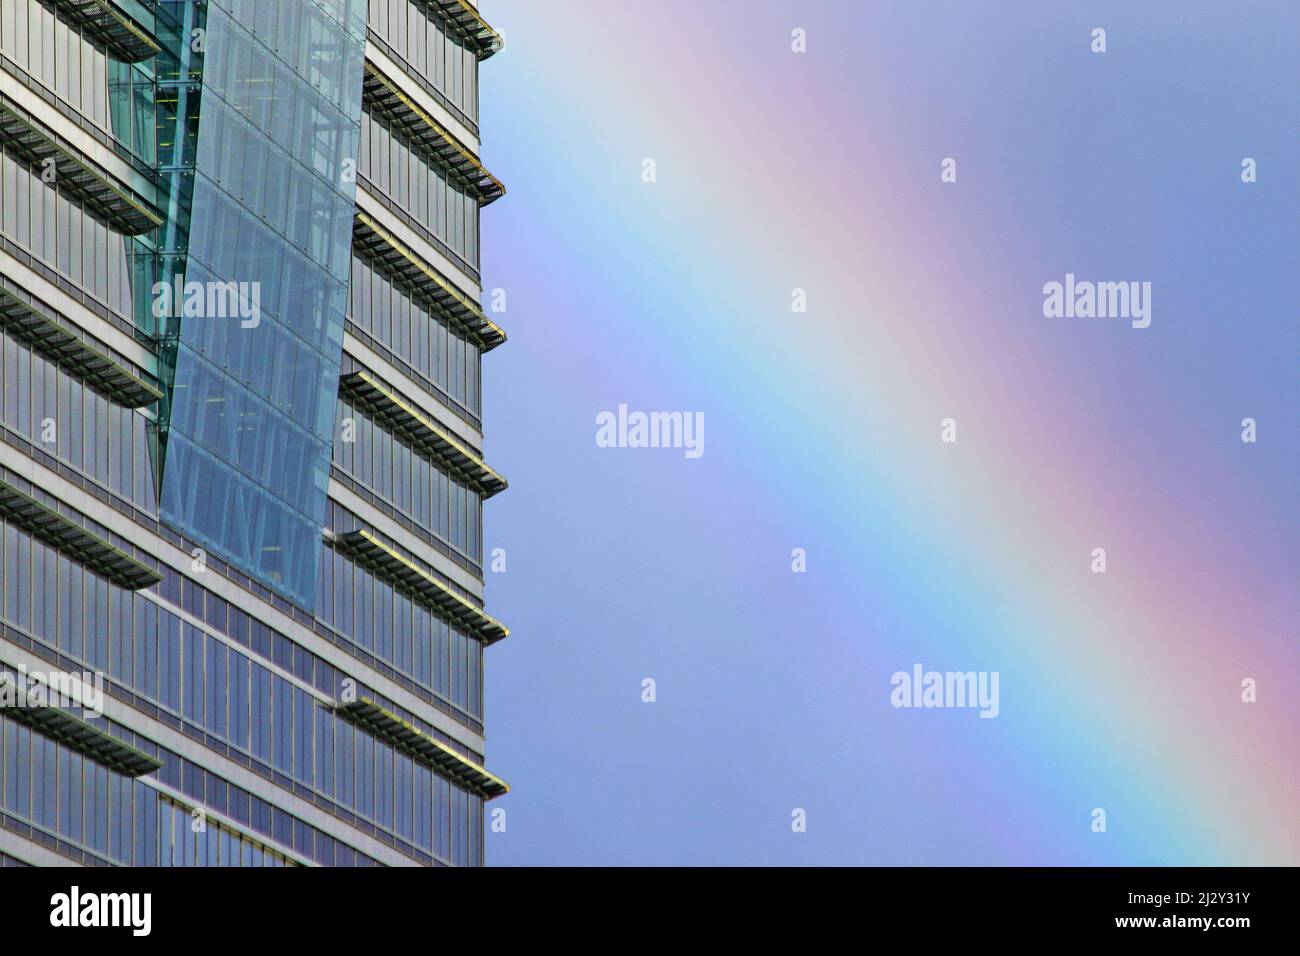 Skyscraper and rainbow. Detail of a contemporary London skyscraper reflecting the blue sky with a natural rainbow visible in the background. Stock Photo